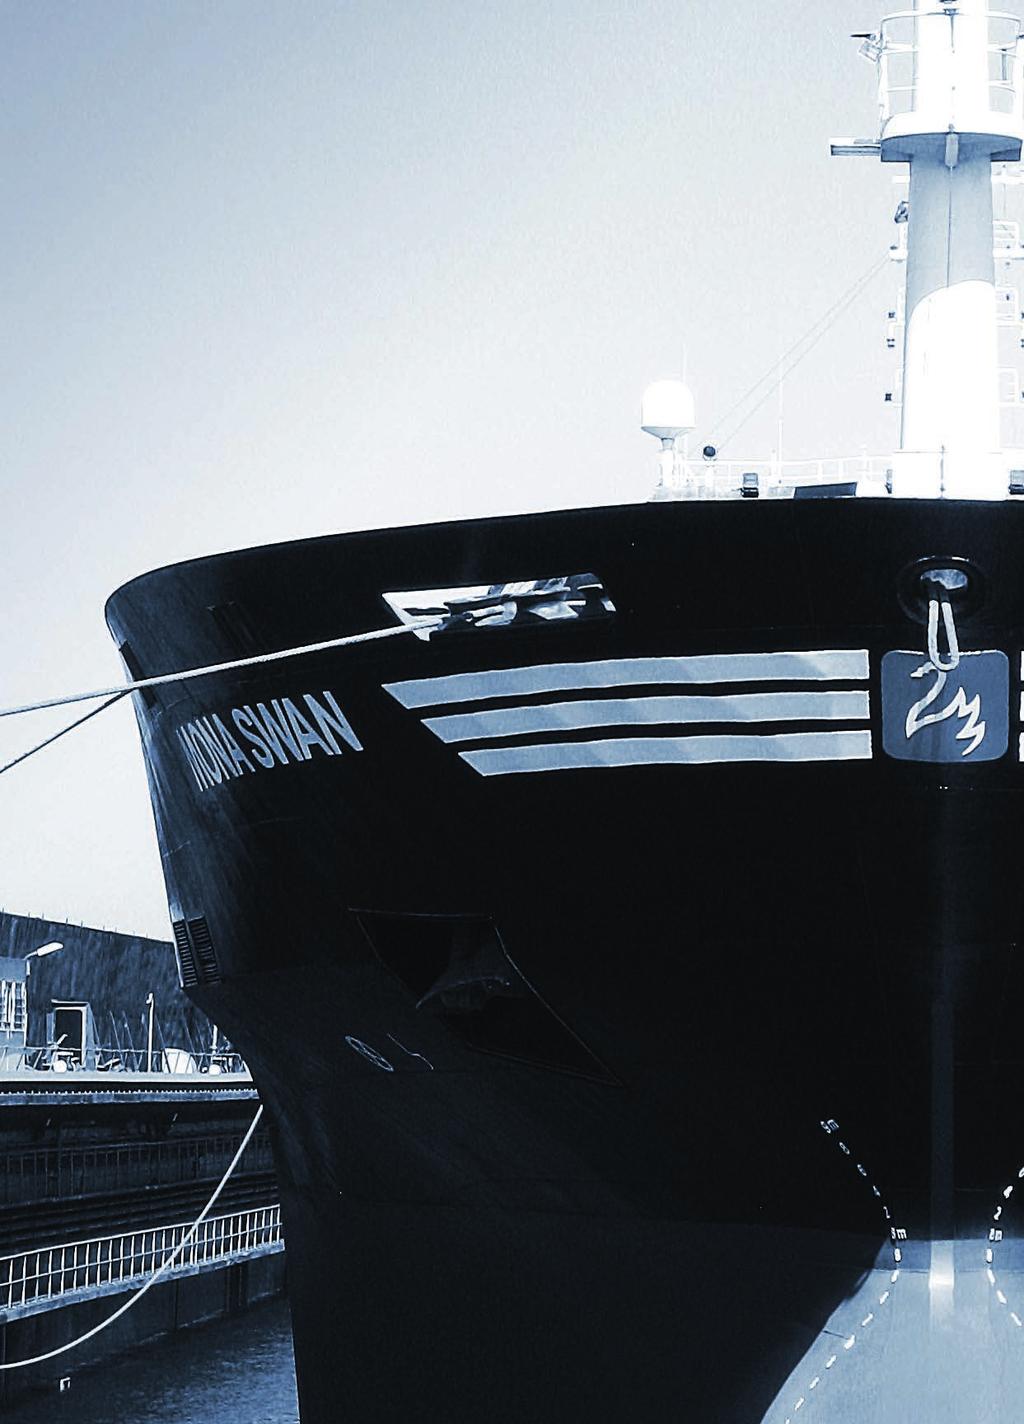 Uni-Tankers Uni-Tankers, based in Middelfart, Denmark and part of United Shipping & Trading Company, has fitted the first of its 17 ships, the Fenno Swan, with an ECO-PAC control system developed by